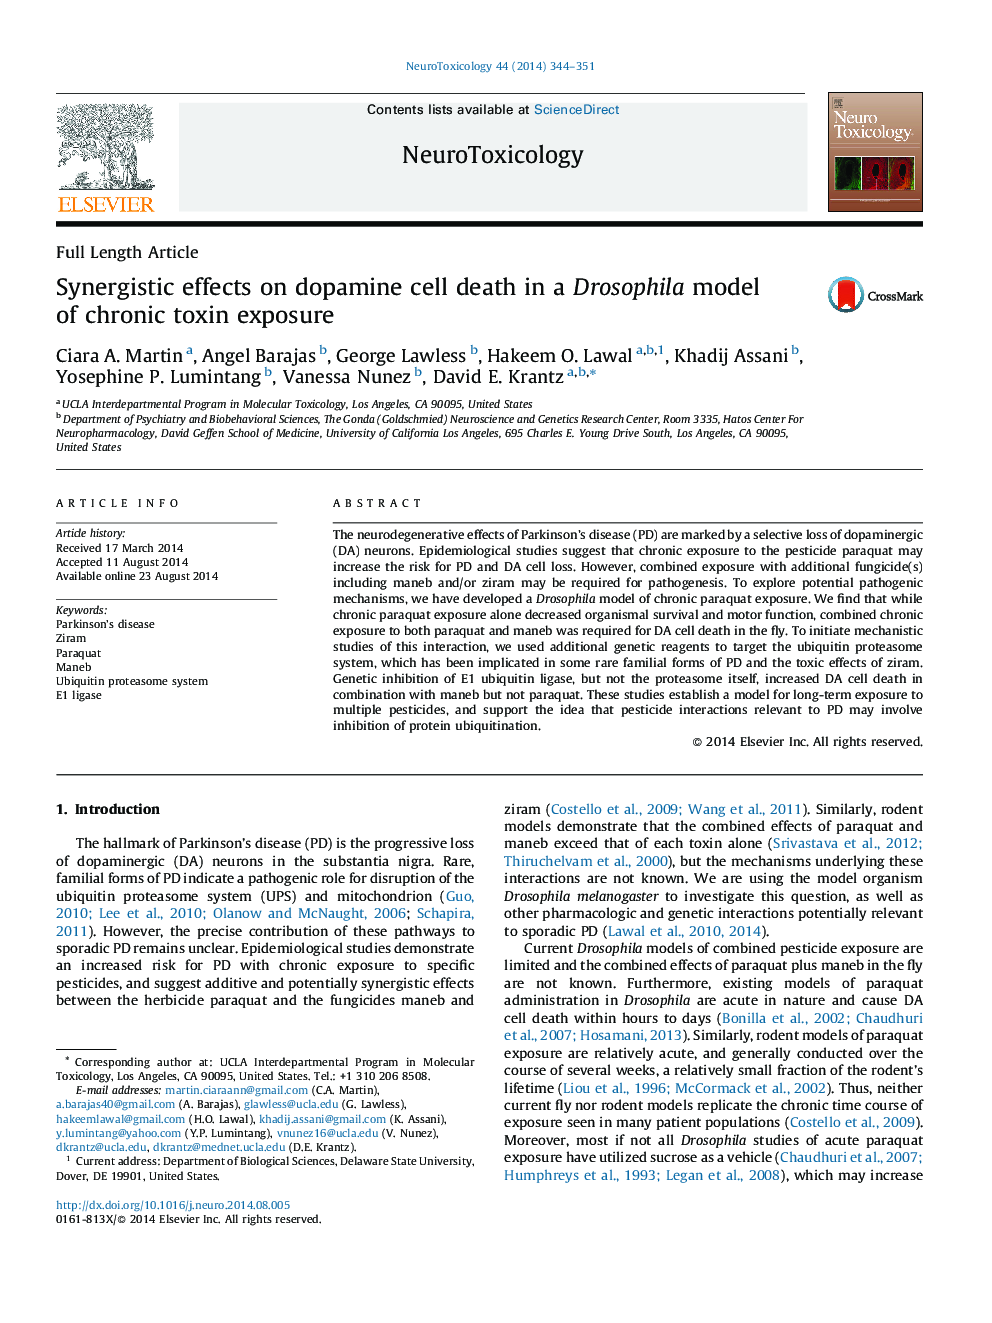 Synergistic effects on dopamine cell death in a Drosophila model of chronic toxin exposure